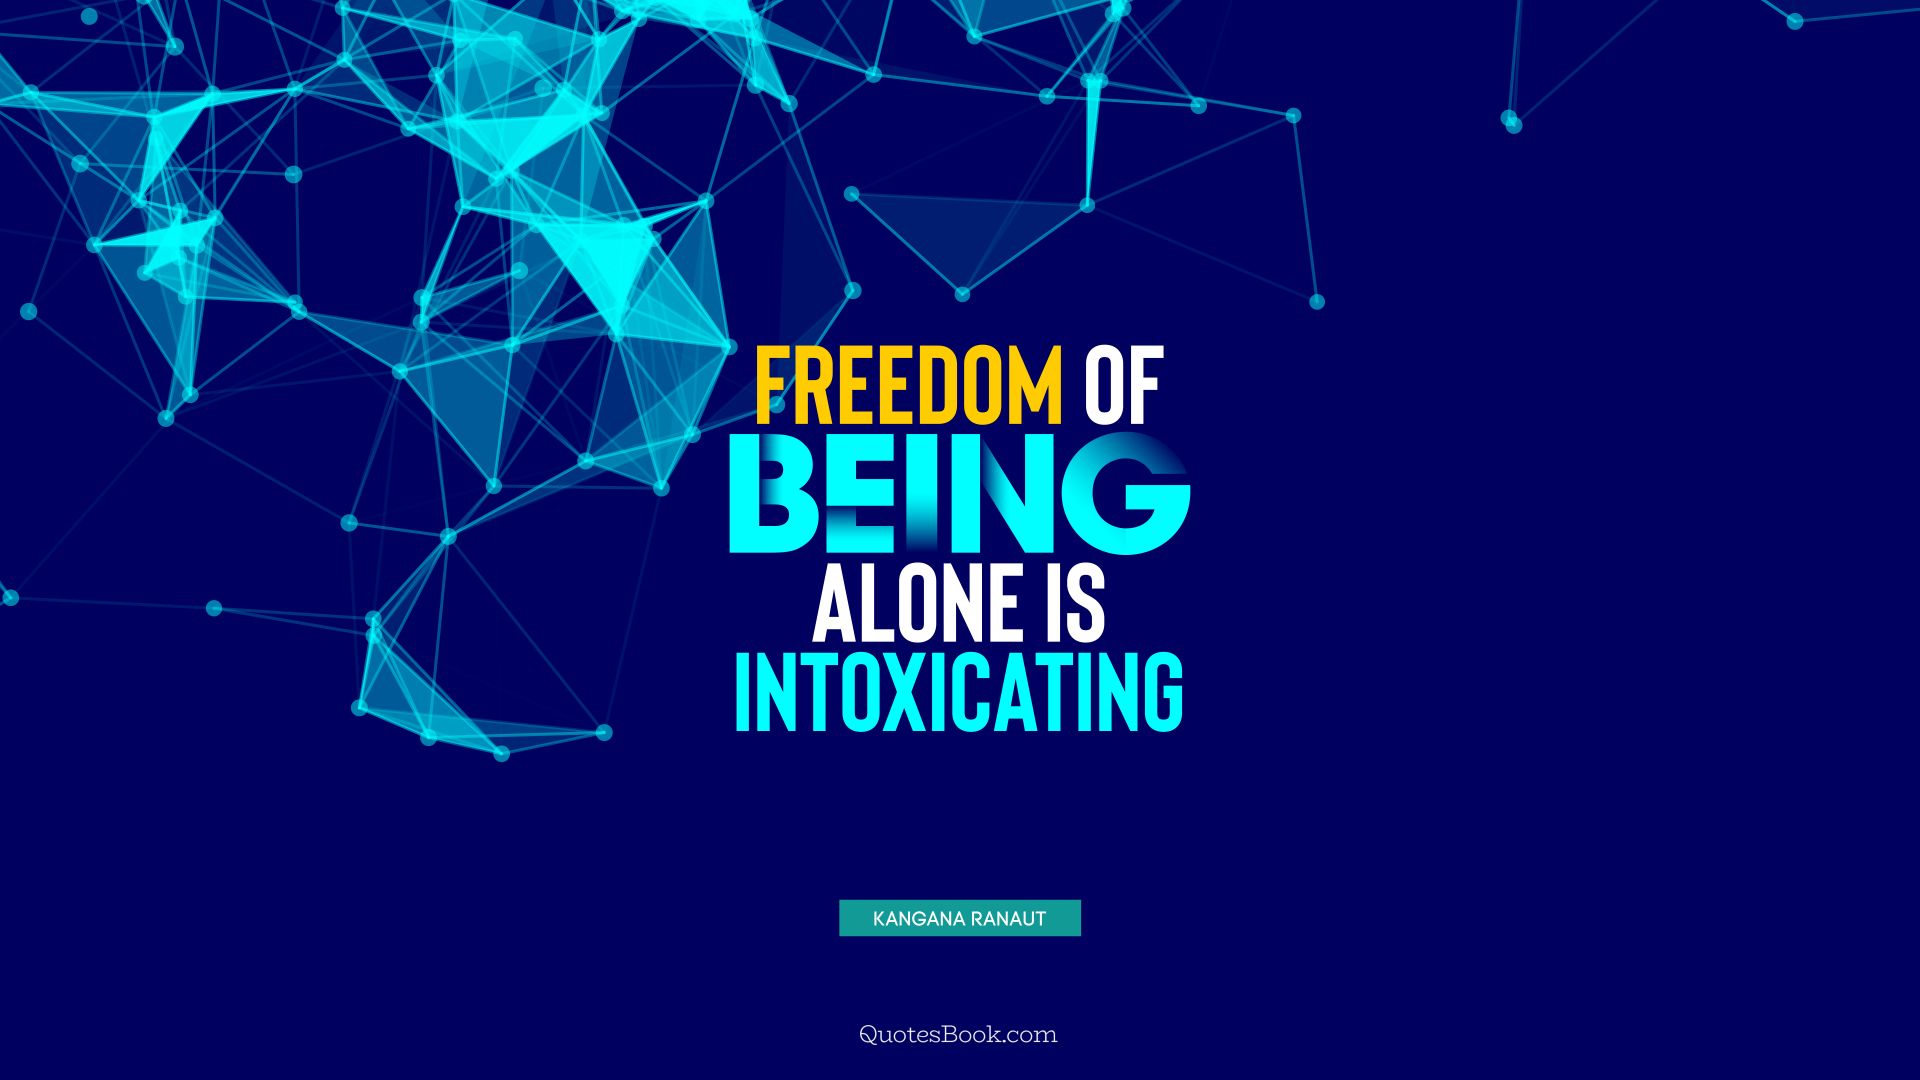 Freedom of being alone is intoxicating. - Quote by Kangana Ranaut